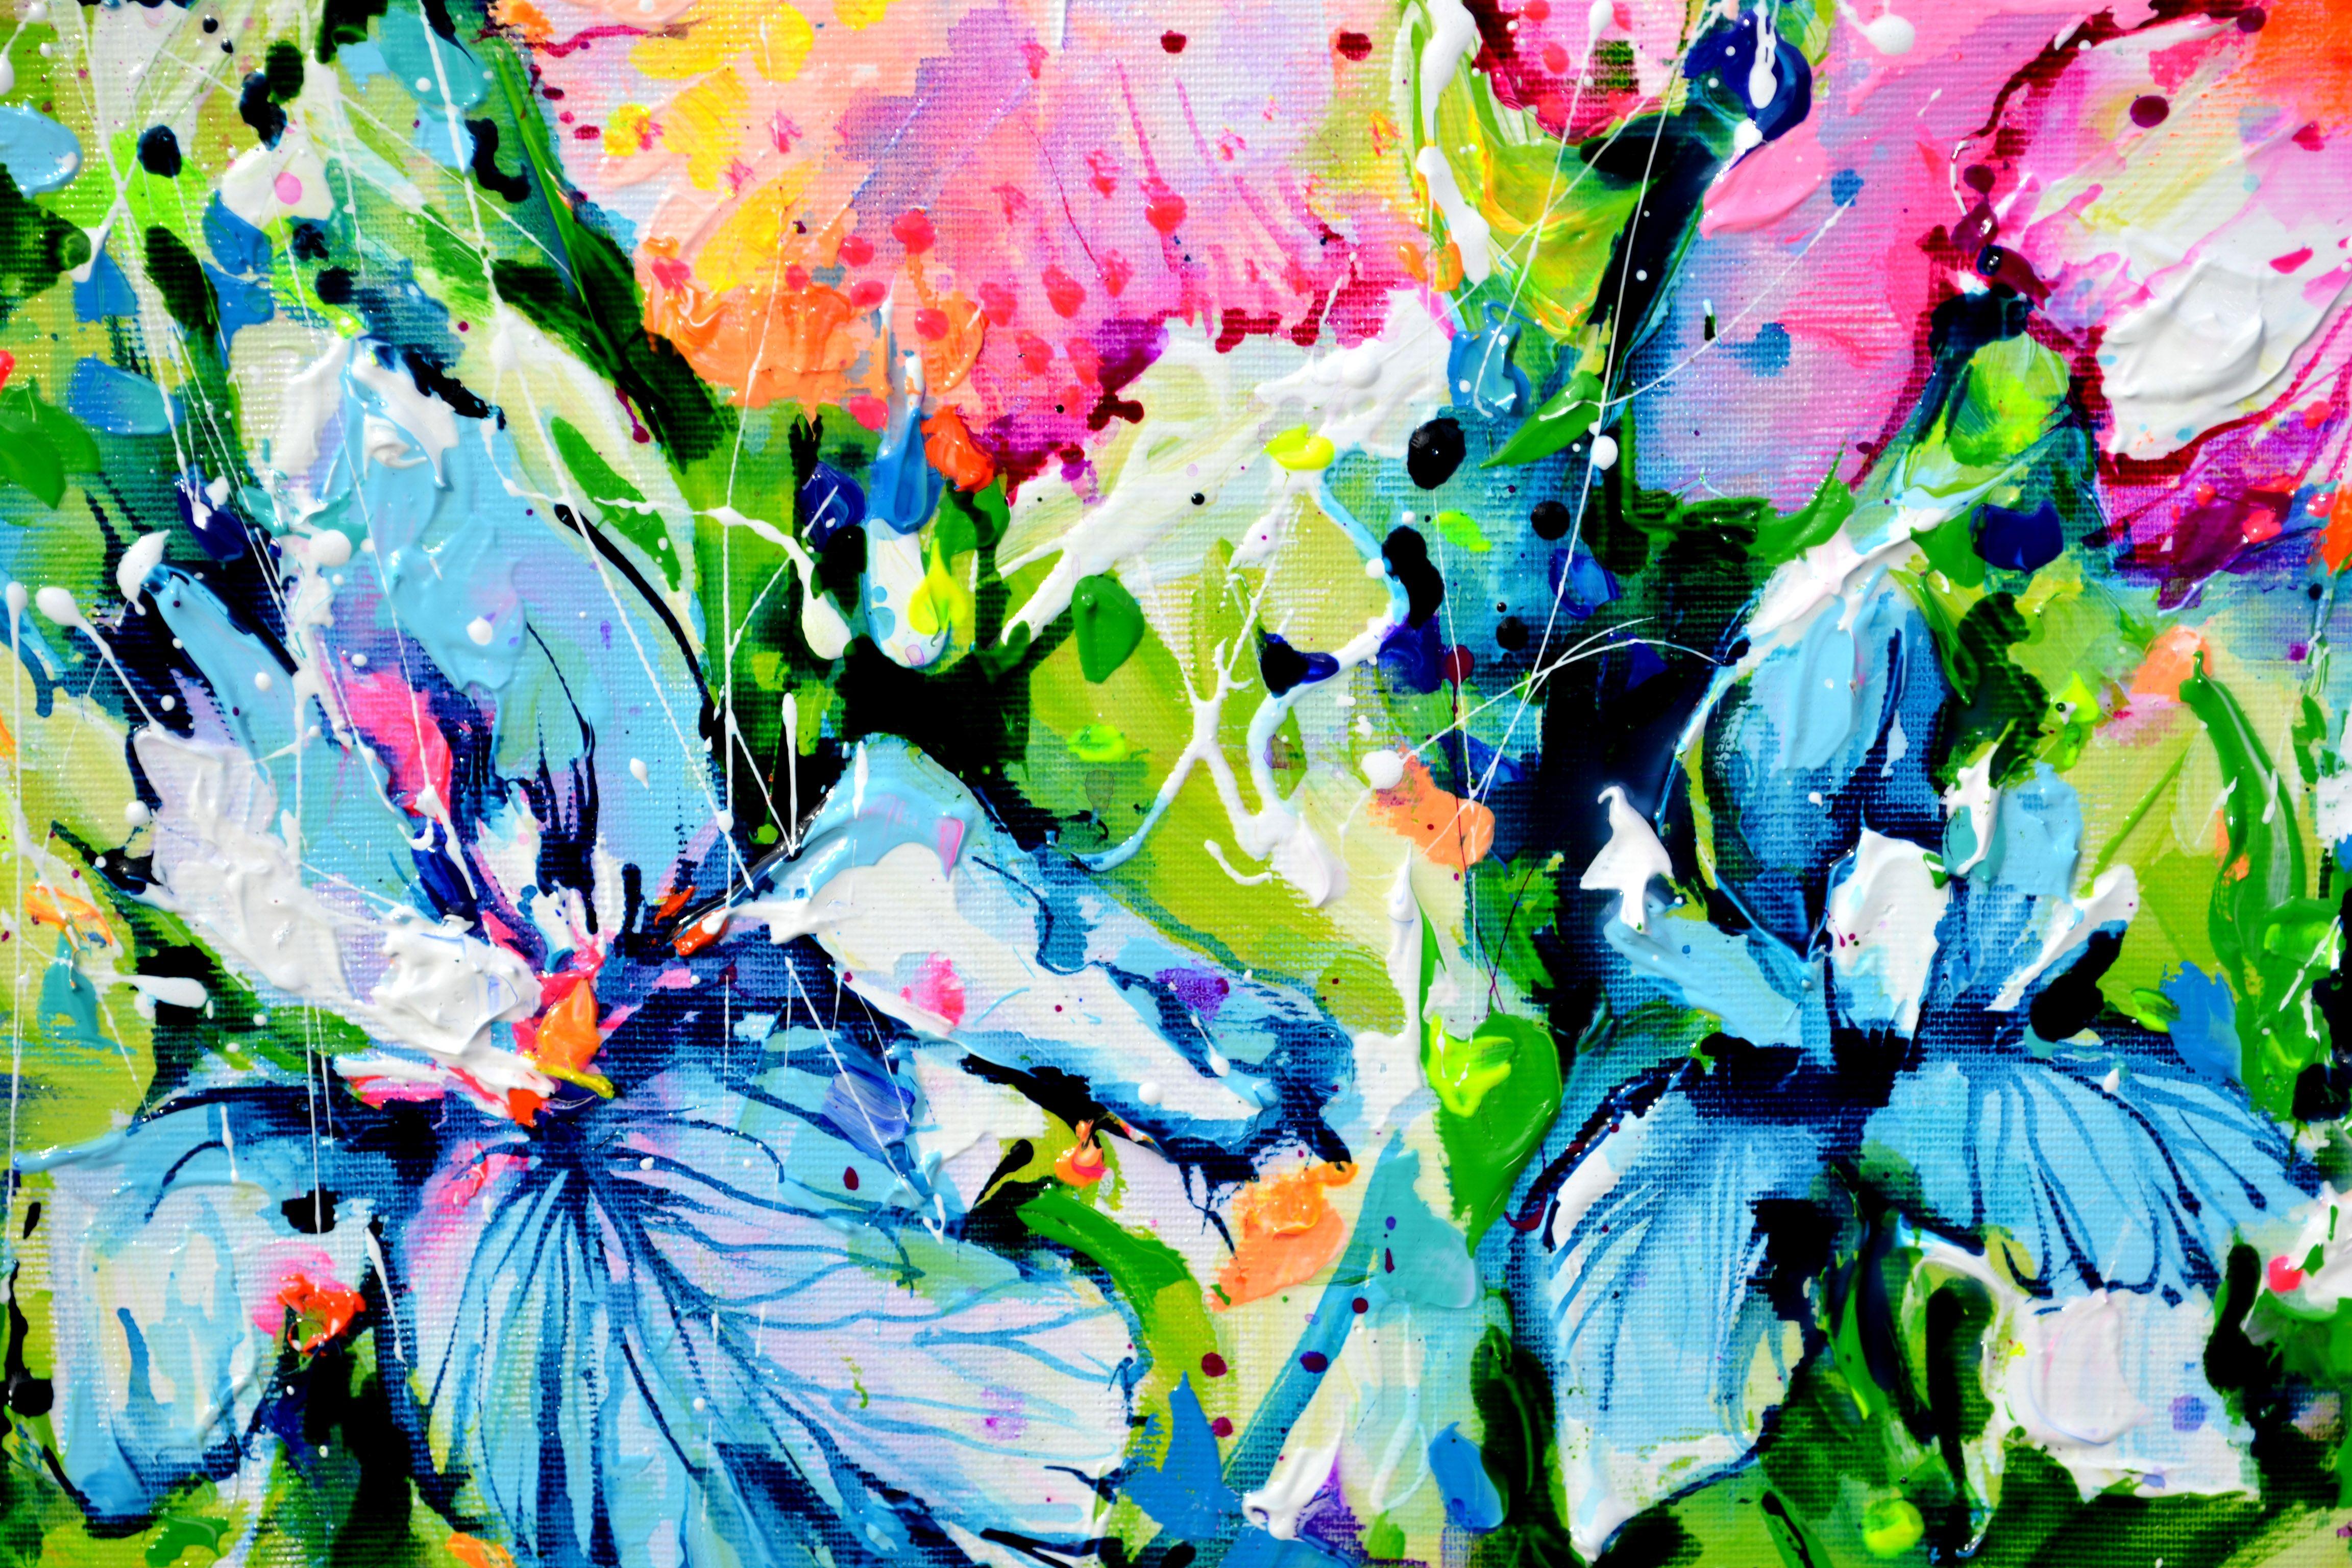 READY TO HANG PAINTING with the edges painted. A beautiful modern iris field painting, made with professional varnished acrylics and Amsterdam acrylic sprays on stretched heavy canvas. Dimensions: 50x50X2 cm, 19.7x19.7x0.8 inches. It is signed and